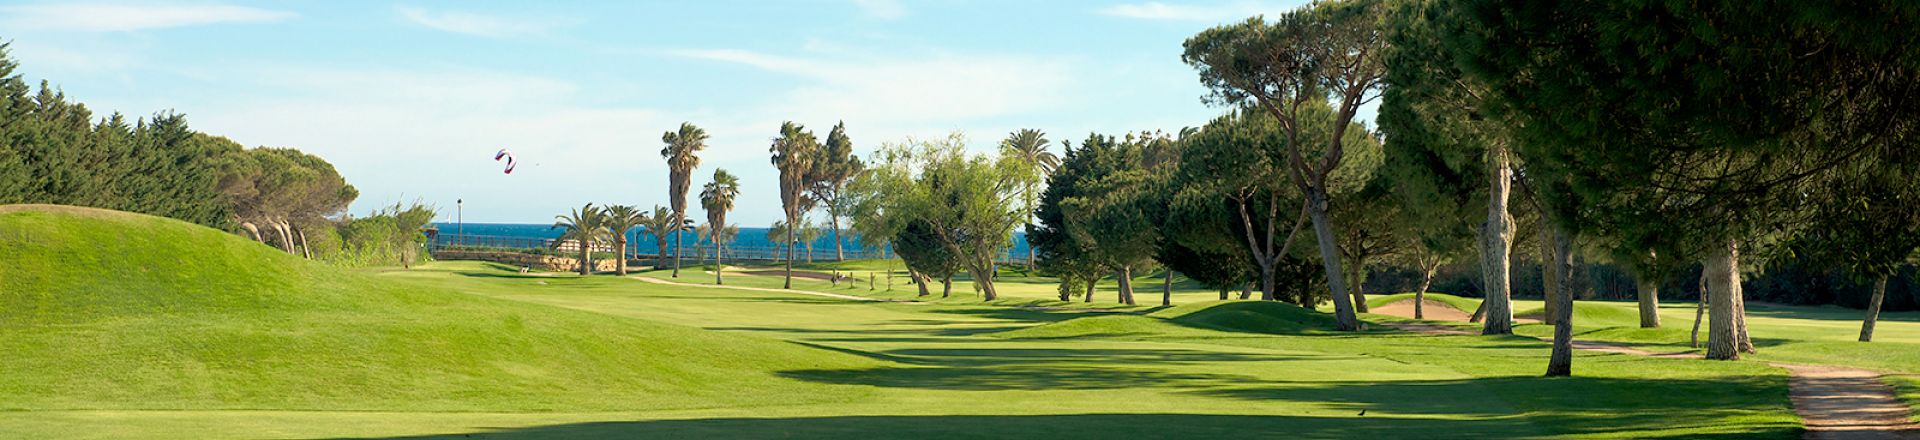 Golf Holidays in Costa Del Sol at the Rio Real Golf Course